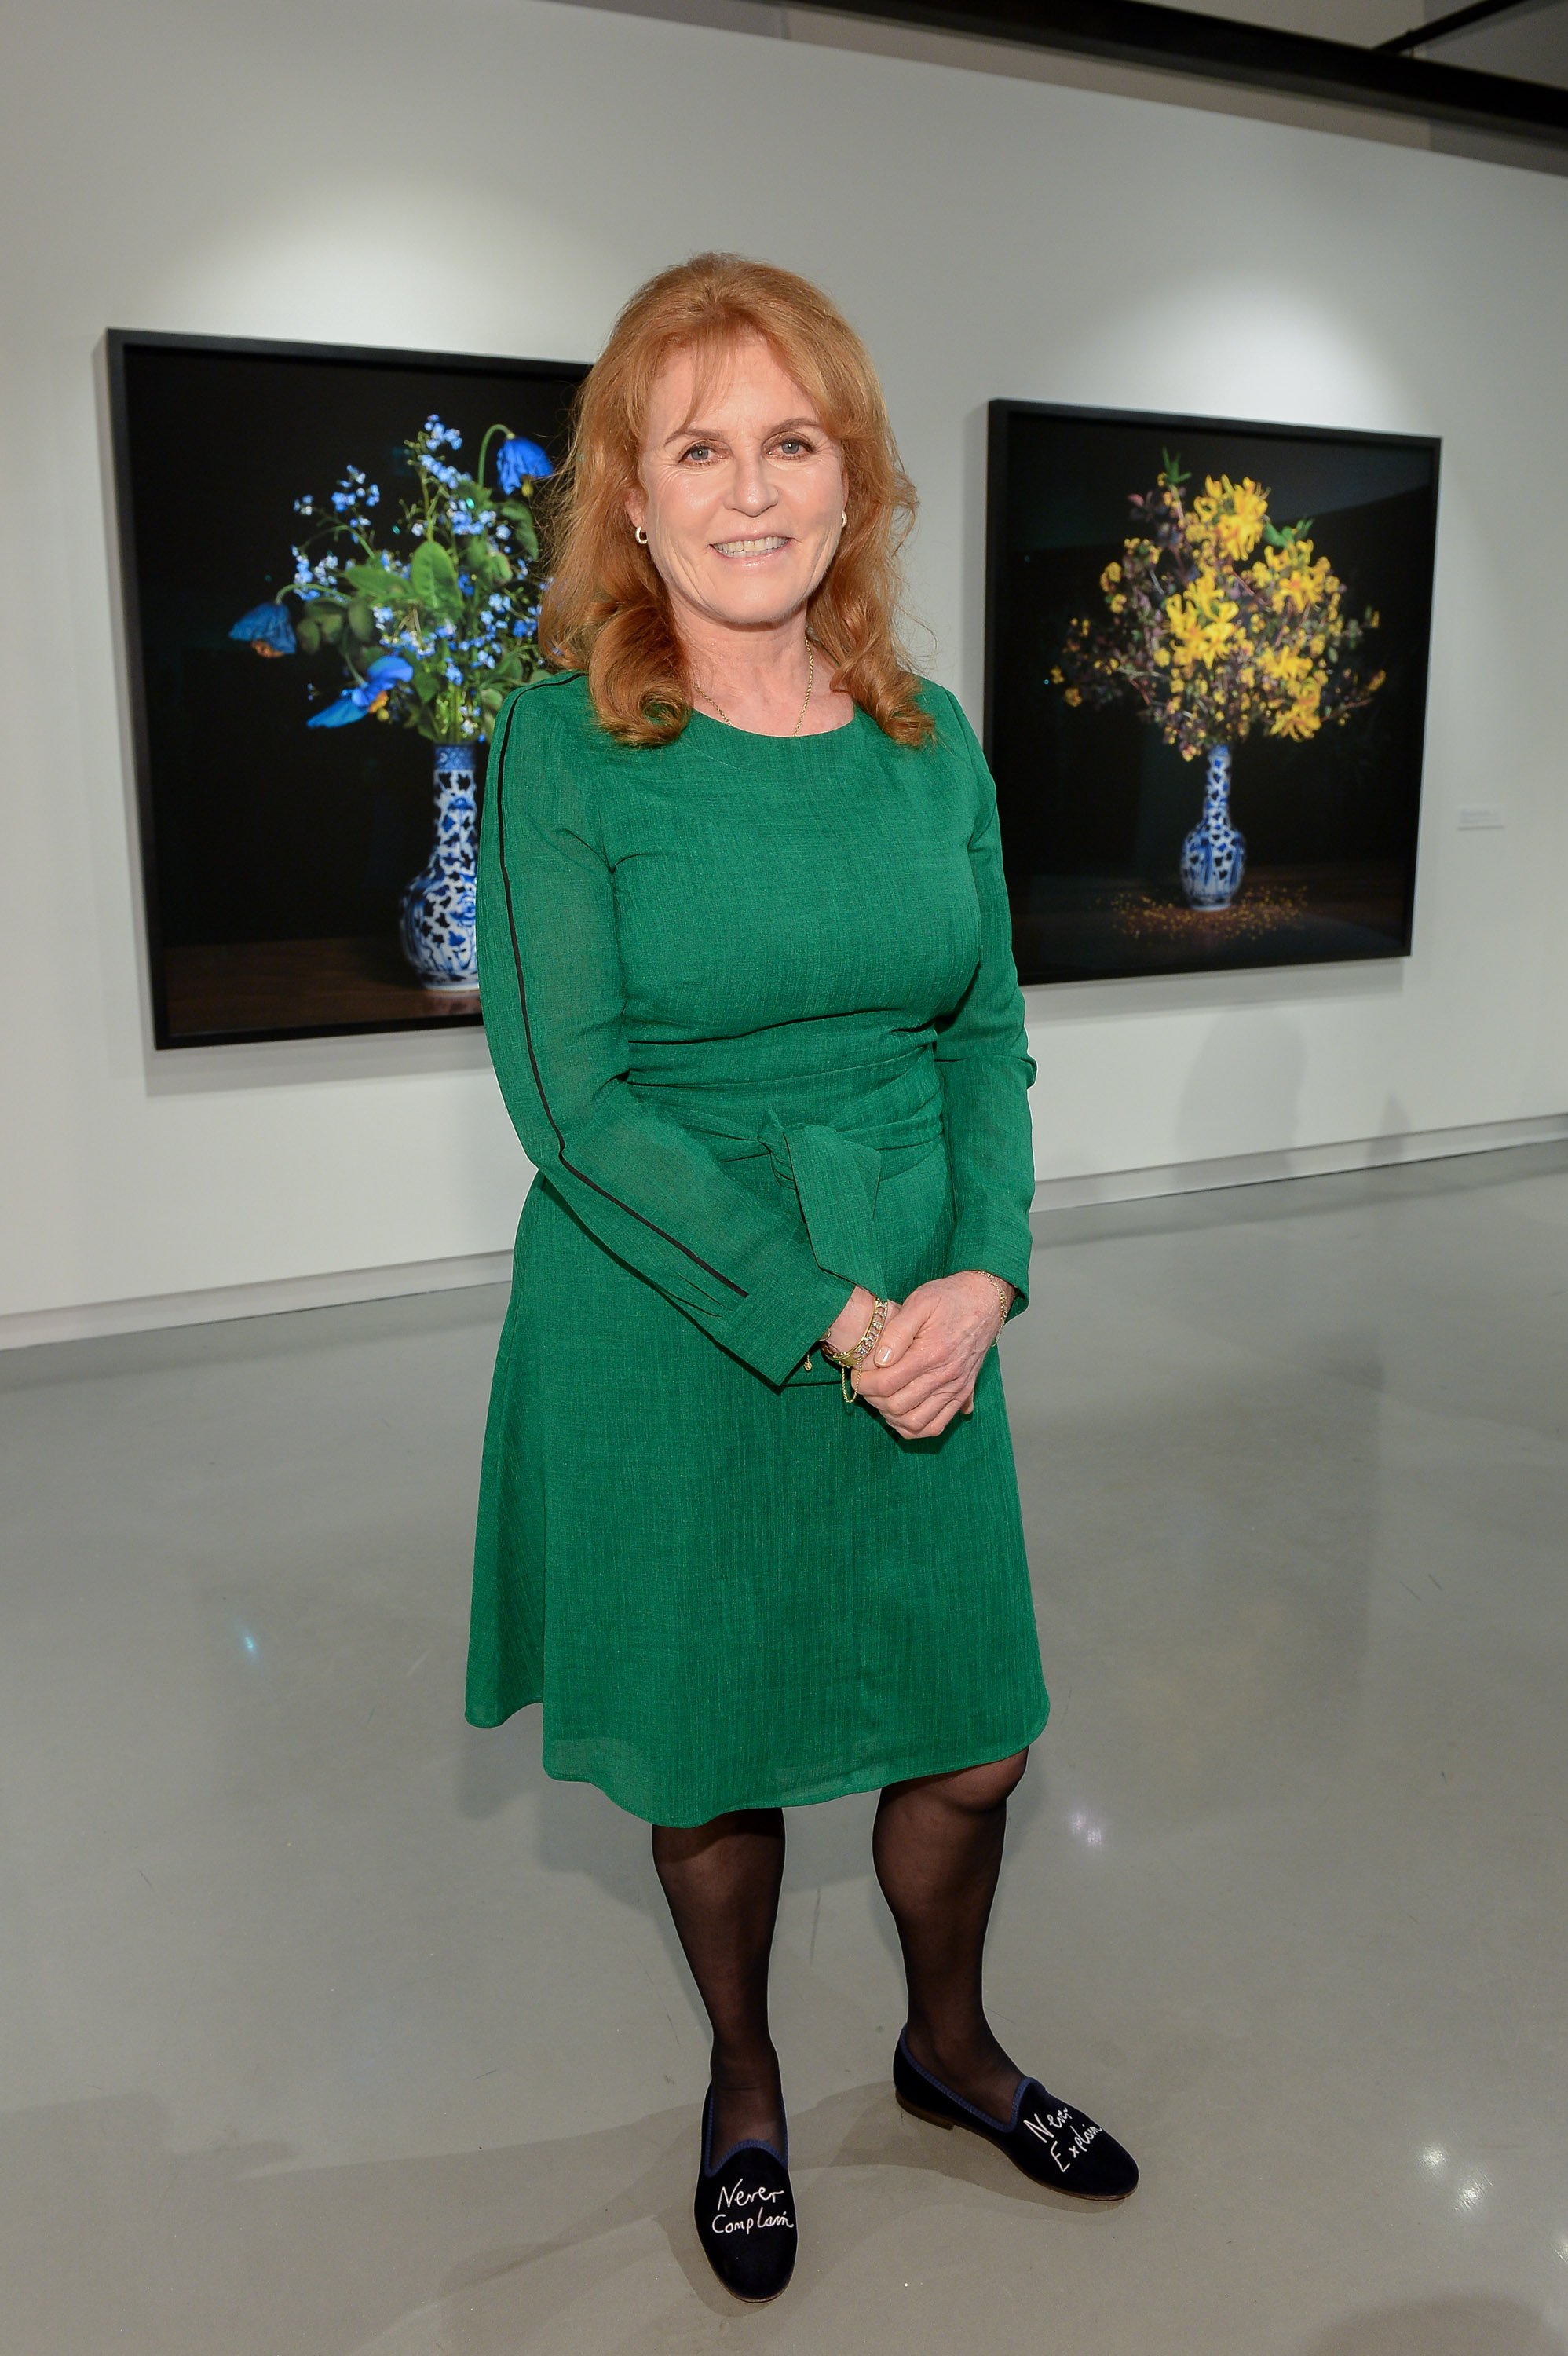 Sarah Ferguson visits the Onsite Gallery in Toronto on Wednesday, May 8, 2019 | Photo: Getty Images